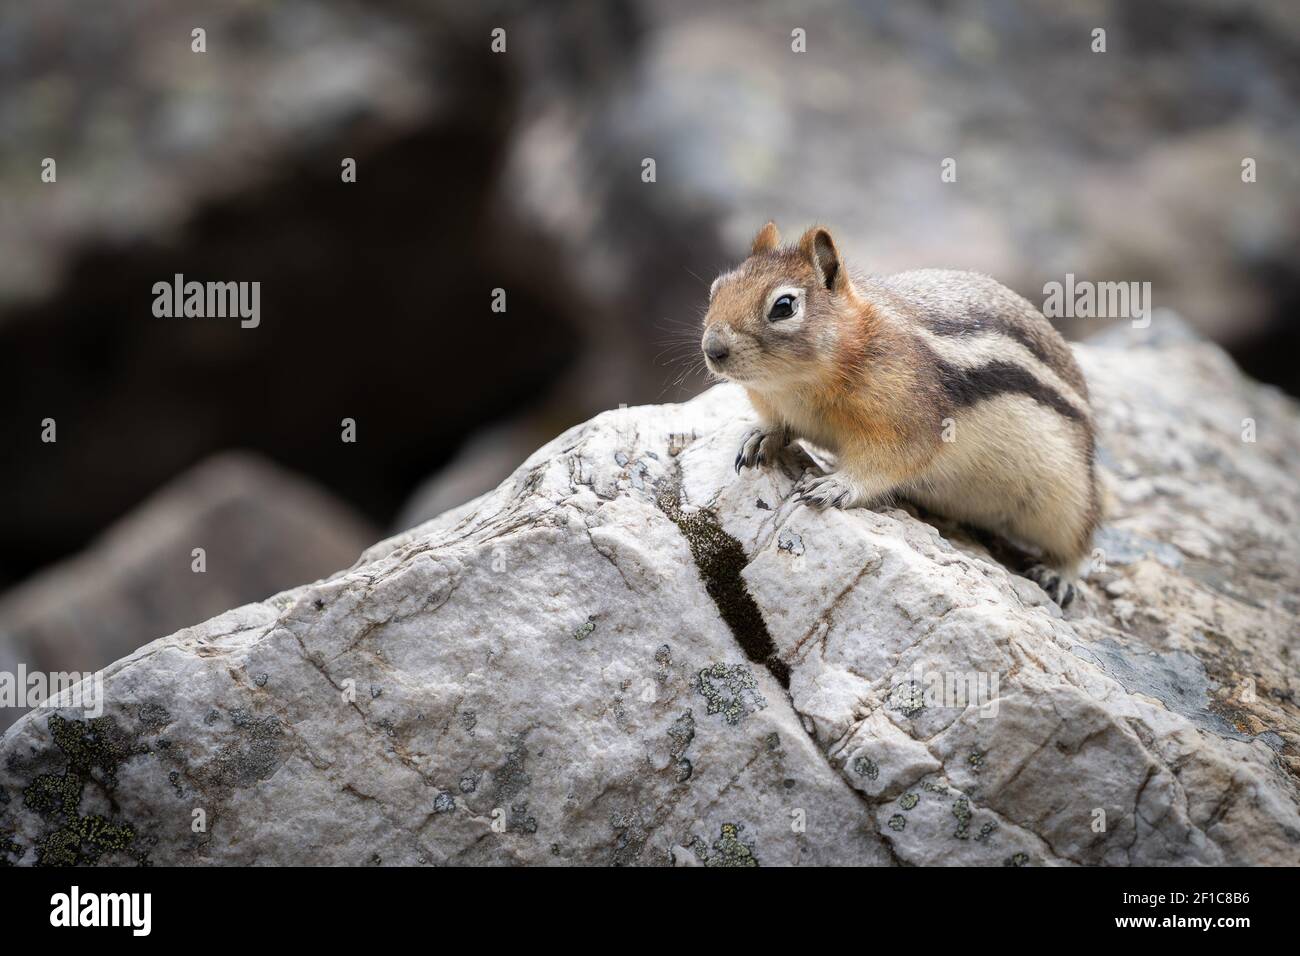 Curious chipmunk climbing rock in order to explore his surroundings, shot at Lake Louise, Banff National Park, Canada Stock Photo